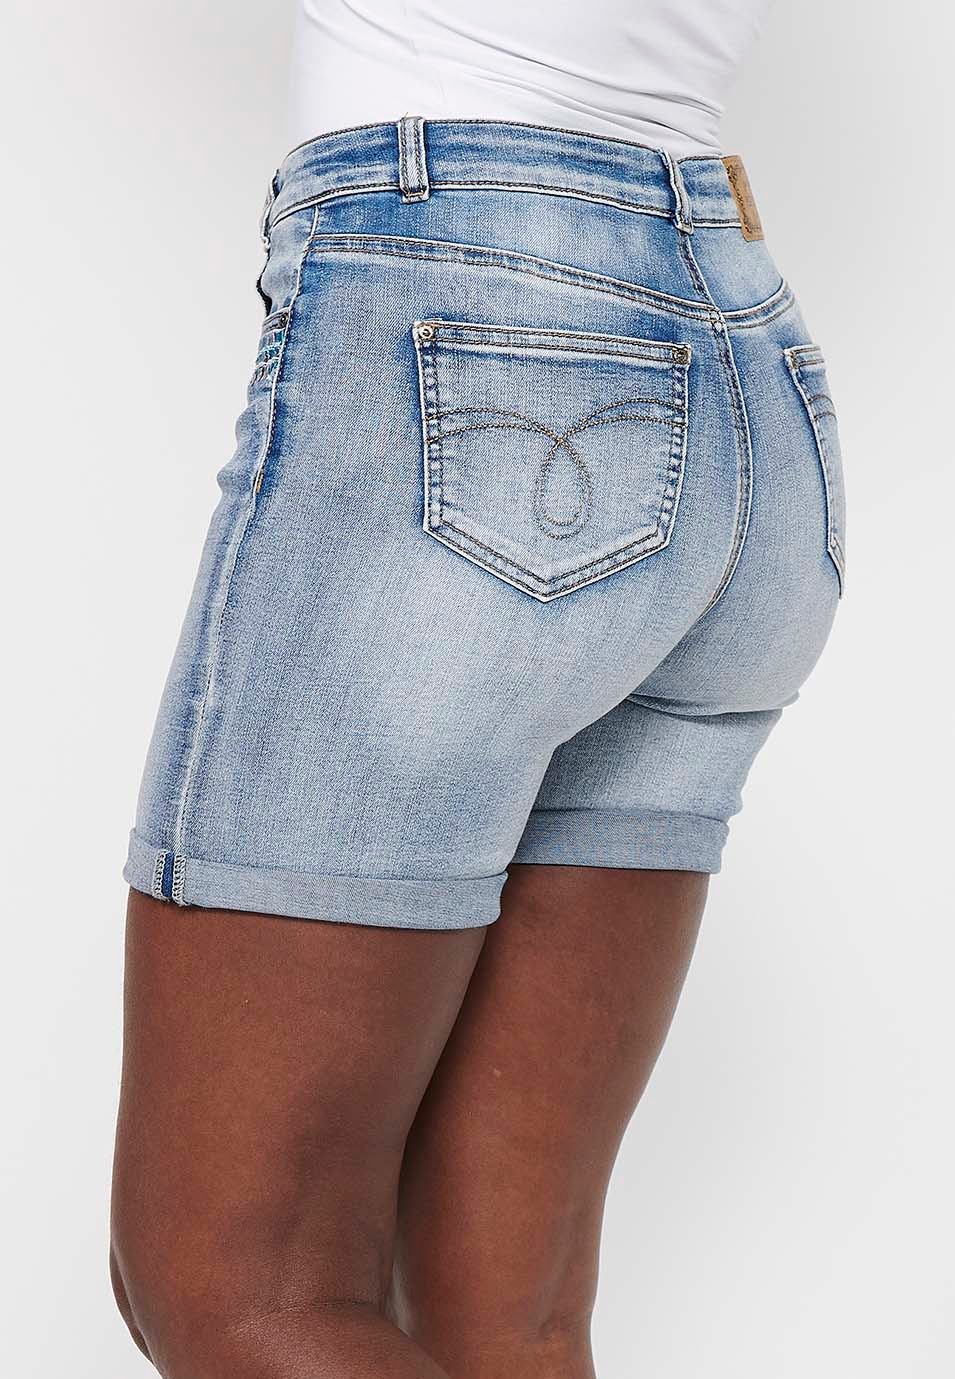 Blue Denim Shorts with Embroidered Details and Front Closure with Zipper and Button for Women 1